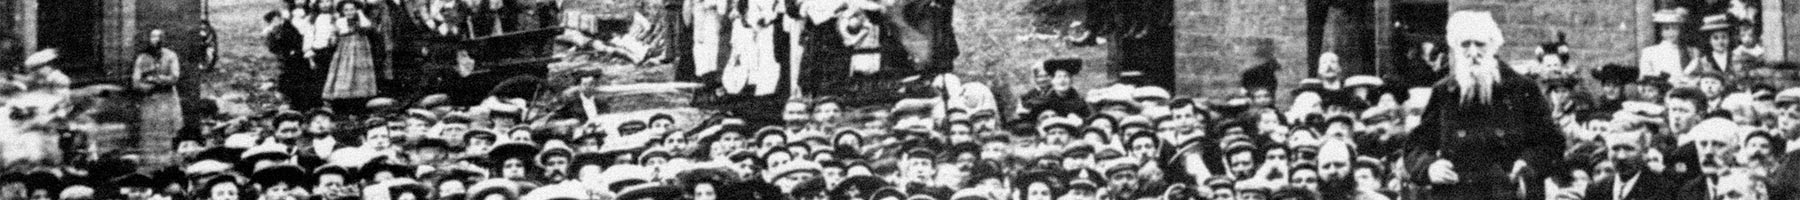 William Booth speaking to a crowd at Denby Dale